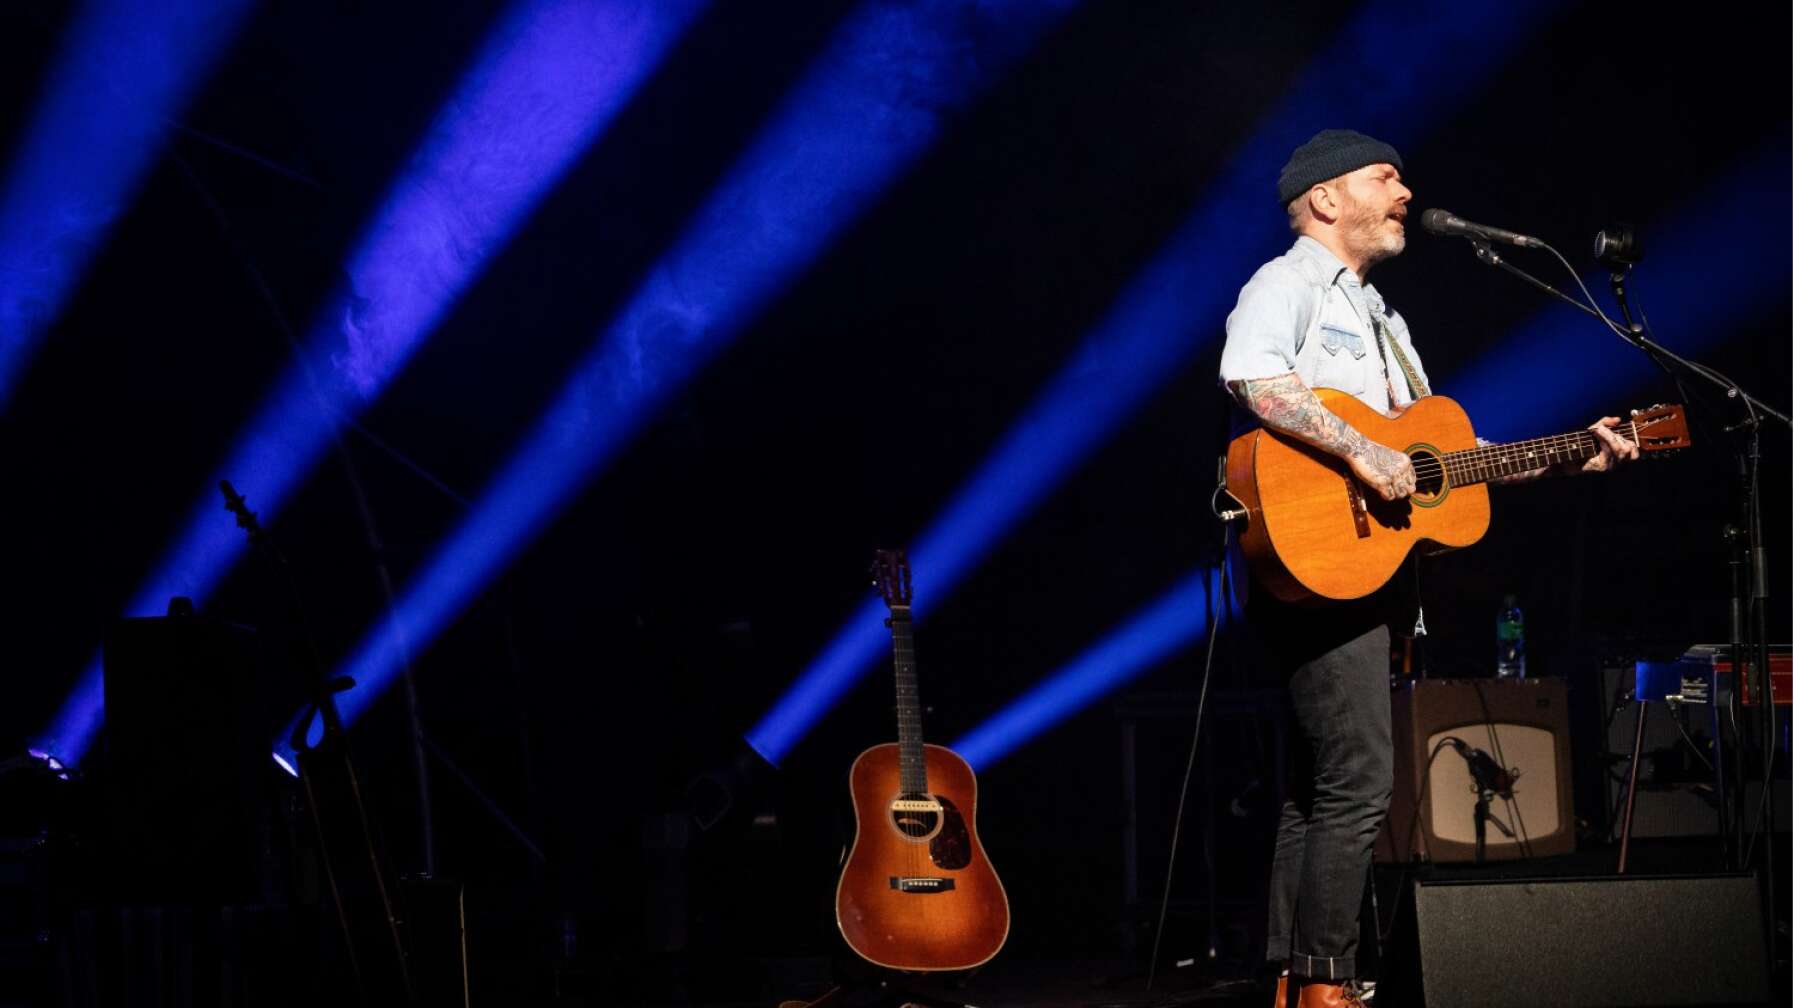 City and Colour live 2020 in München